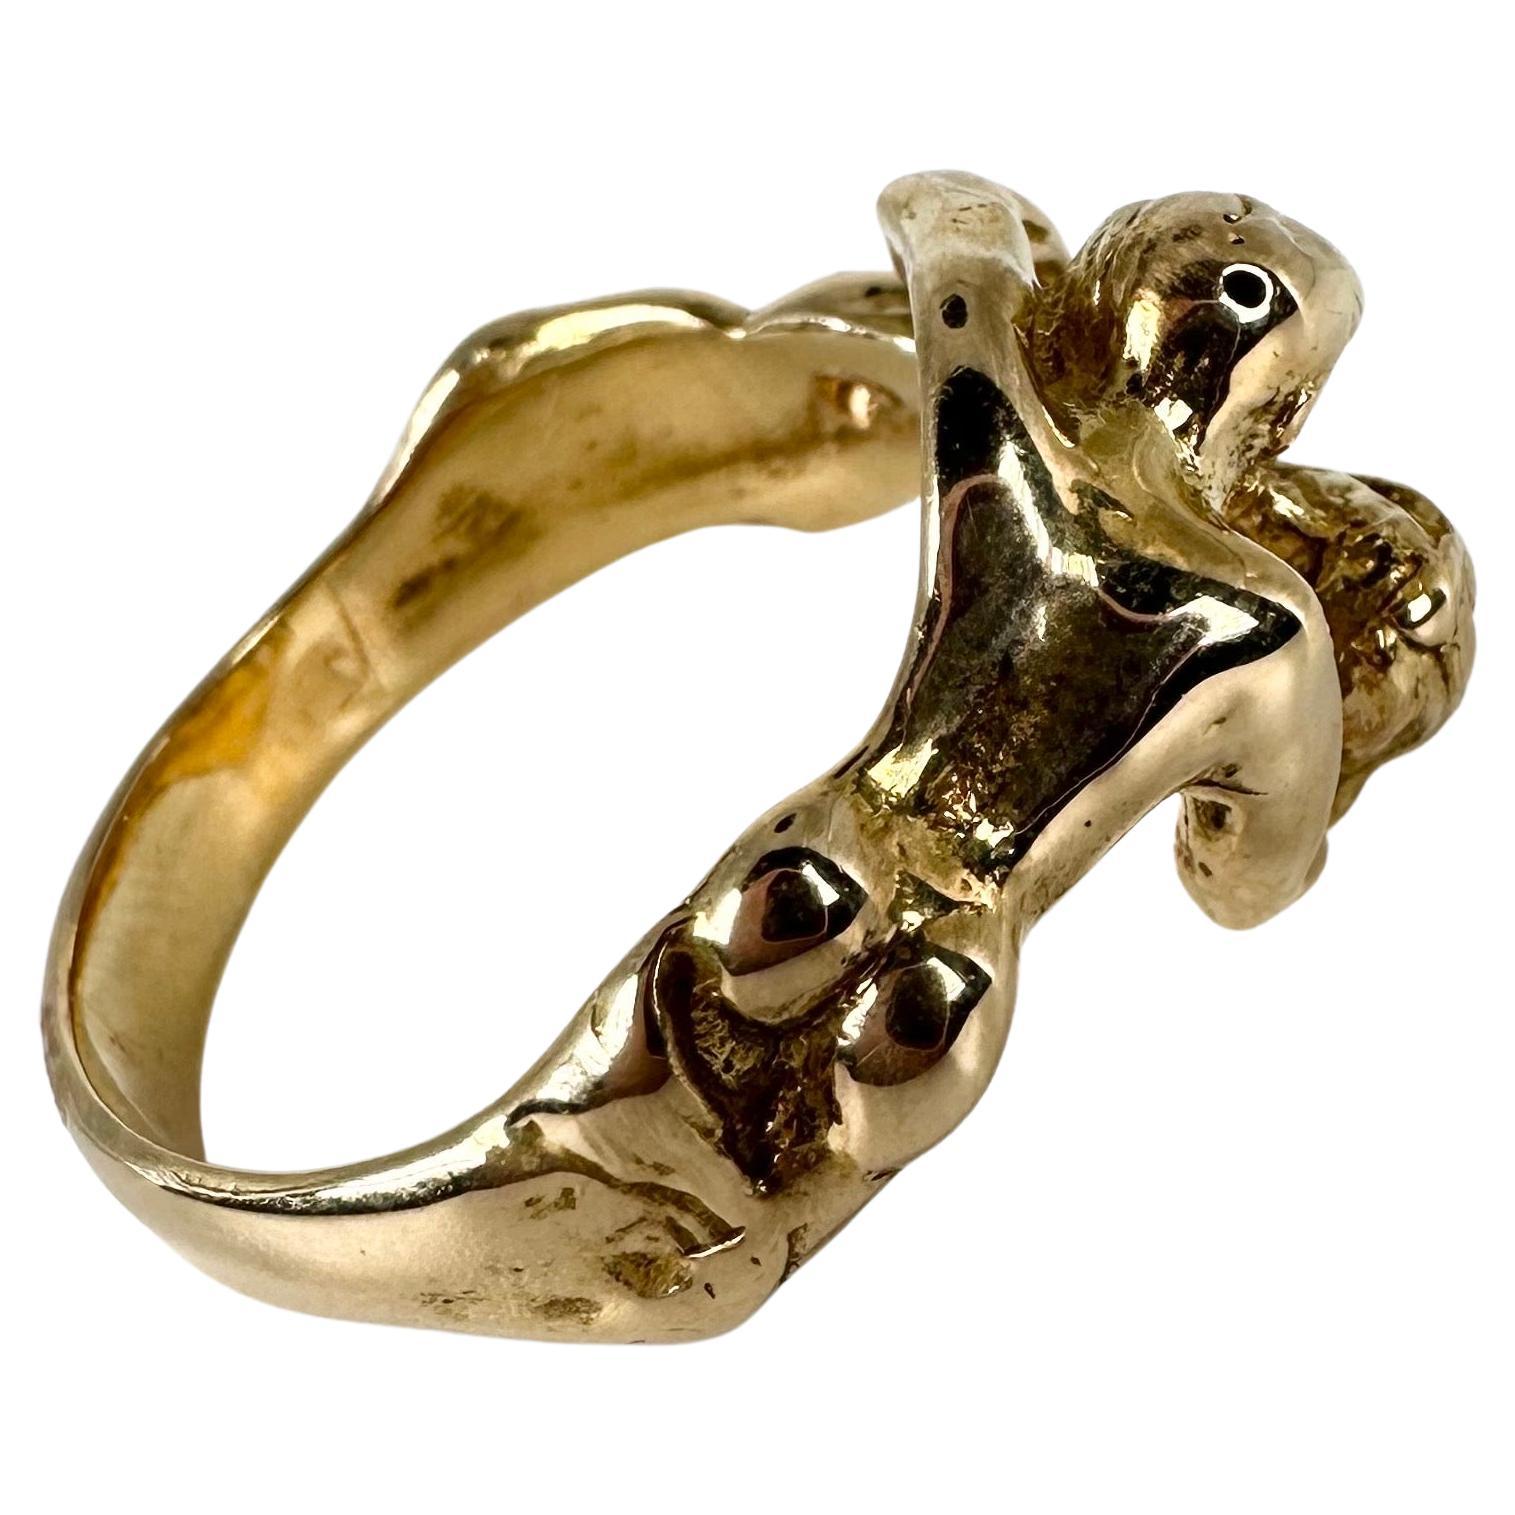 Make love sex 18KT gold ring solid gold art ring unique rare ring For Sale